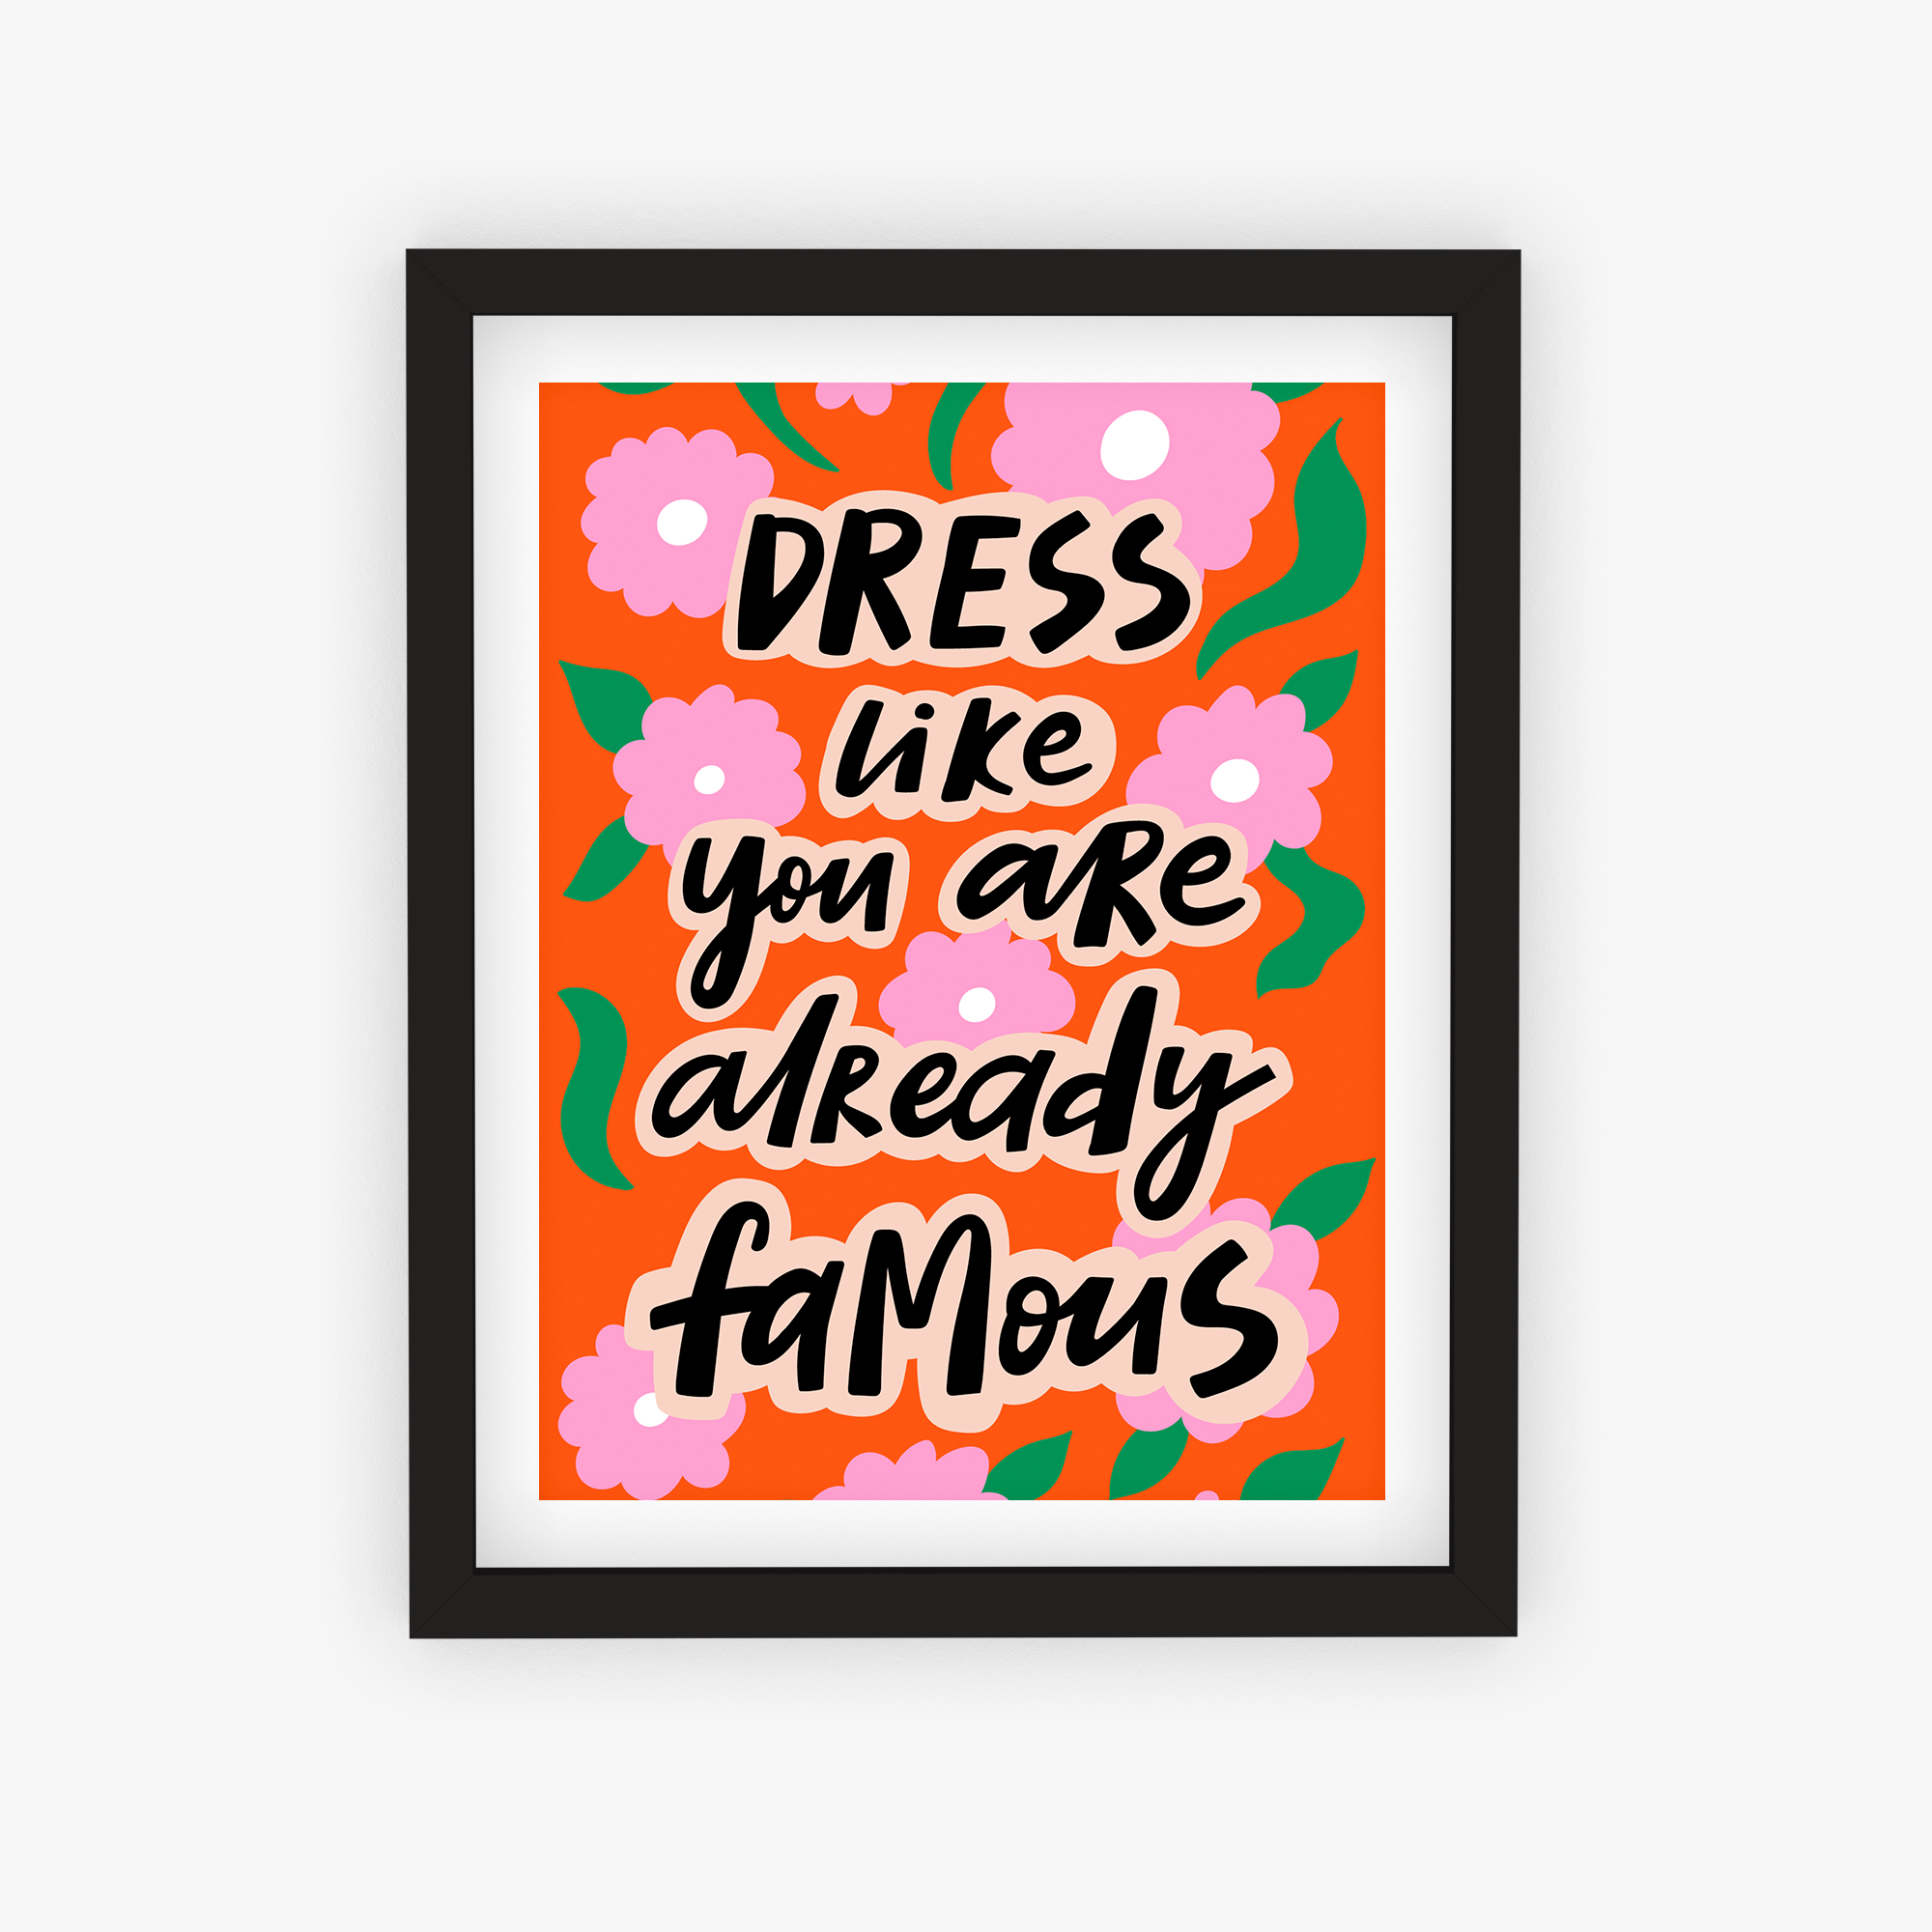 Dress Like You Are Already Famous Poster